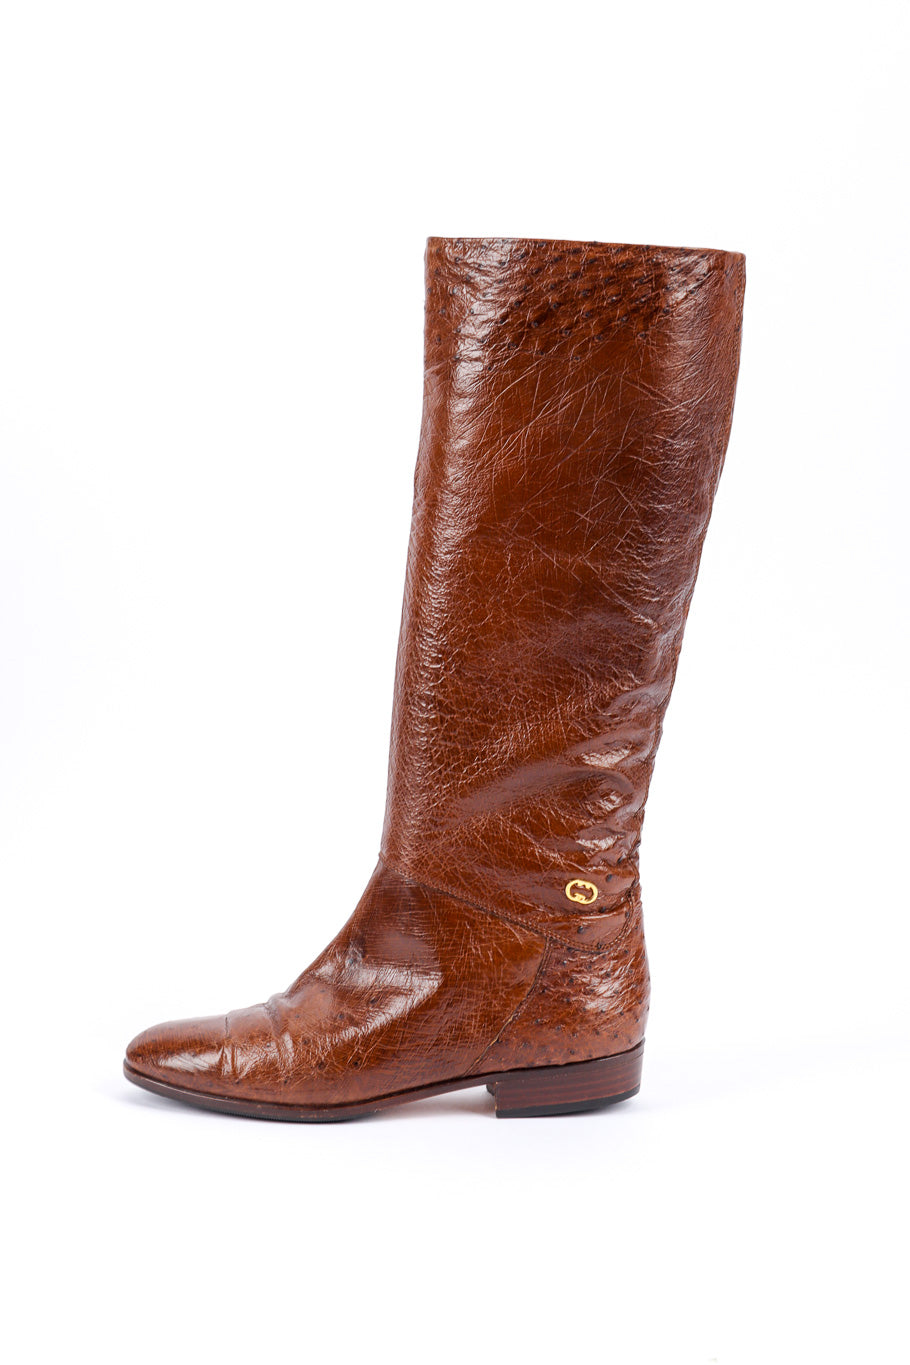 Vintage Gucci Brown Ostrich Leather Riding Boot left boot outer view @recessla